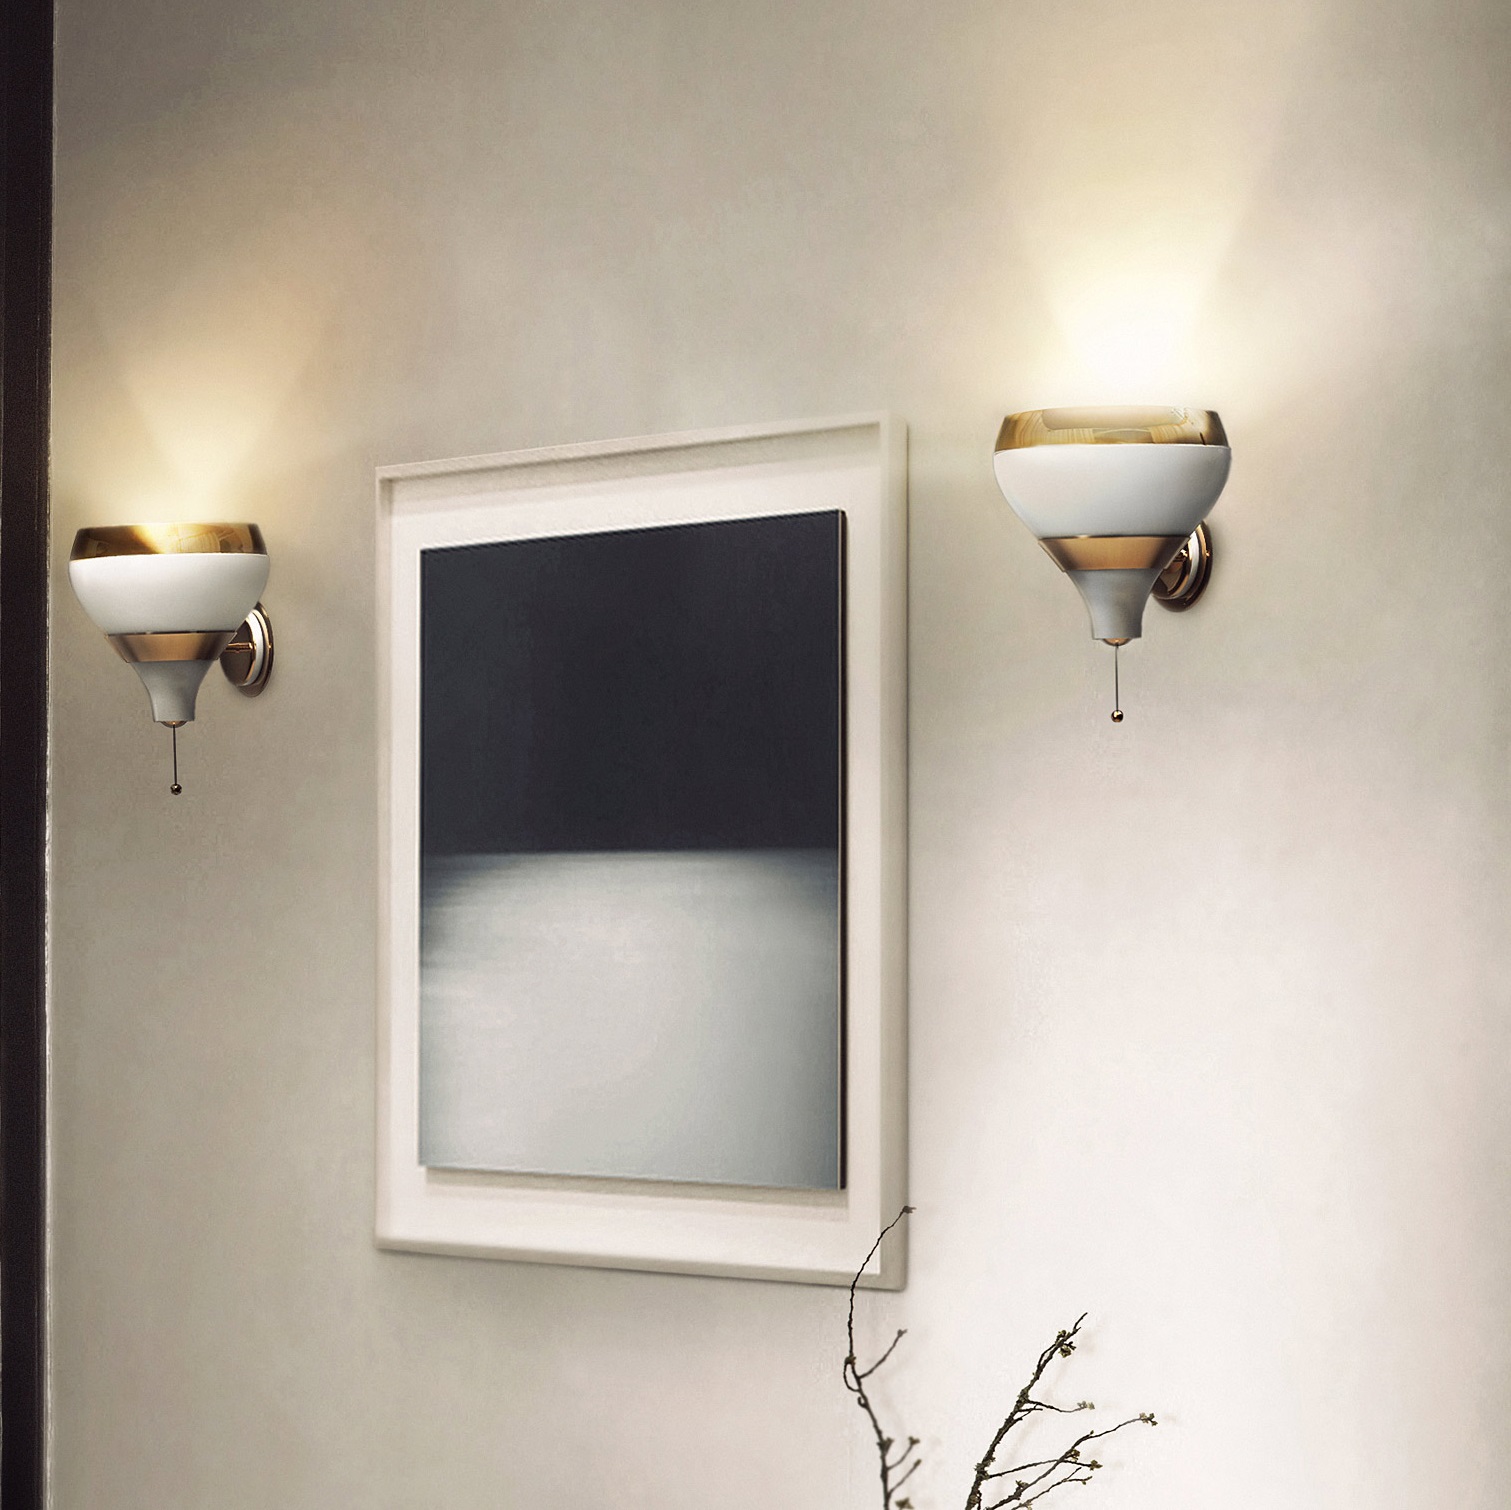 The Easiest Way To Style Wall Lamps Inside Your Home Decor, Here 4 Wall Lamps